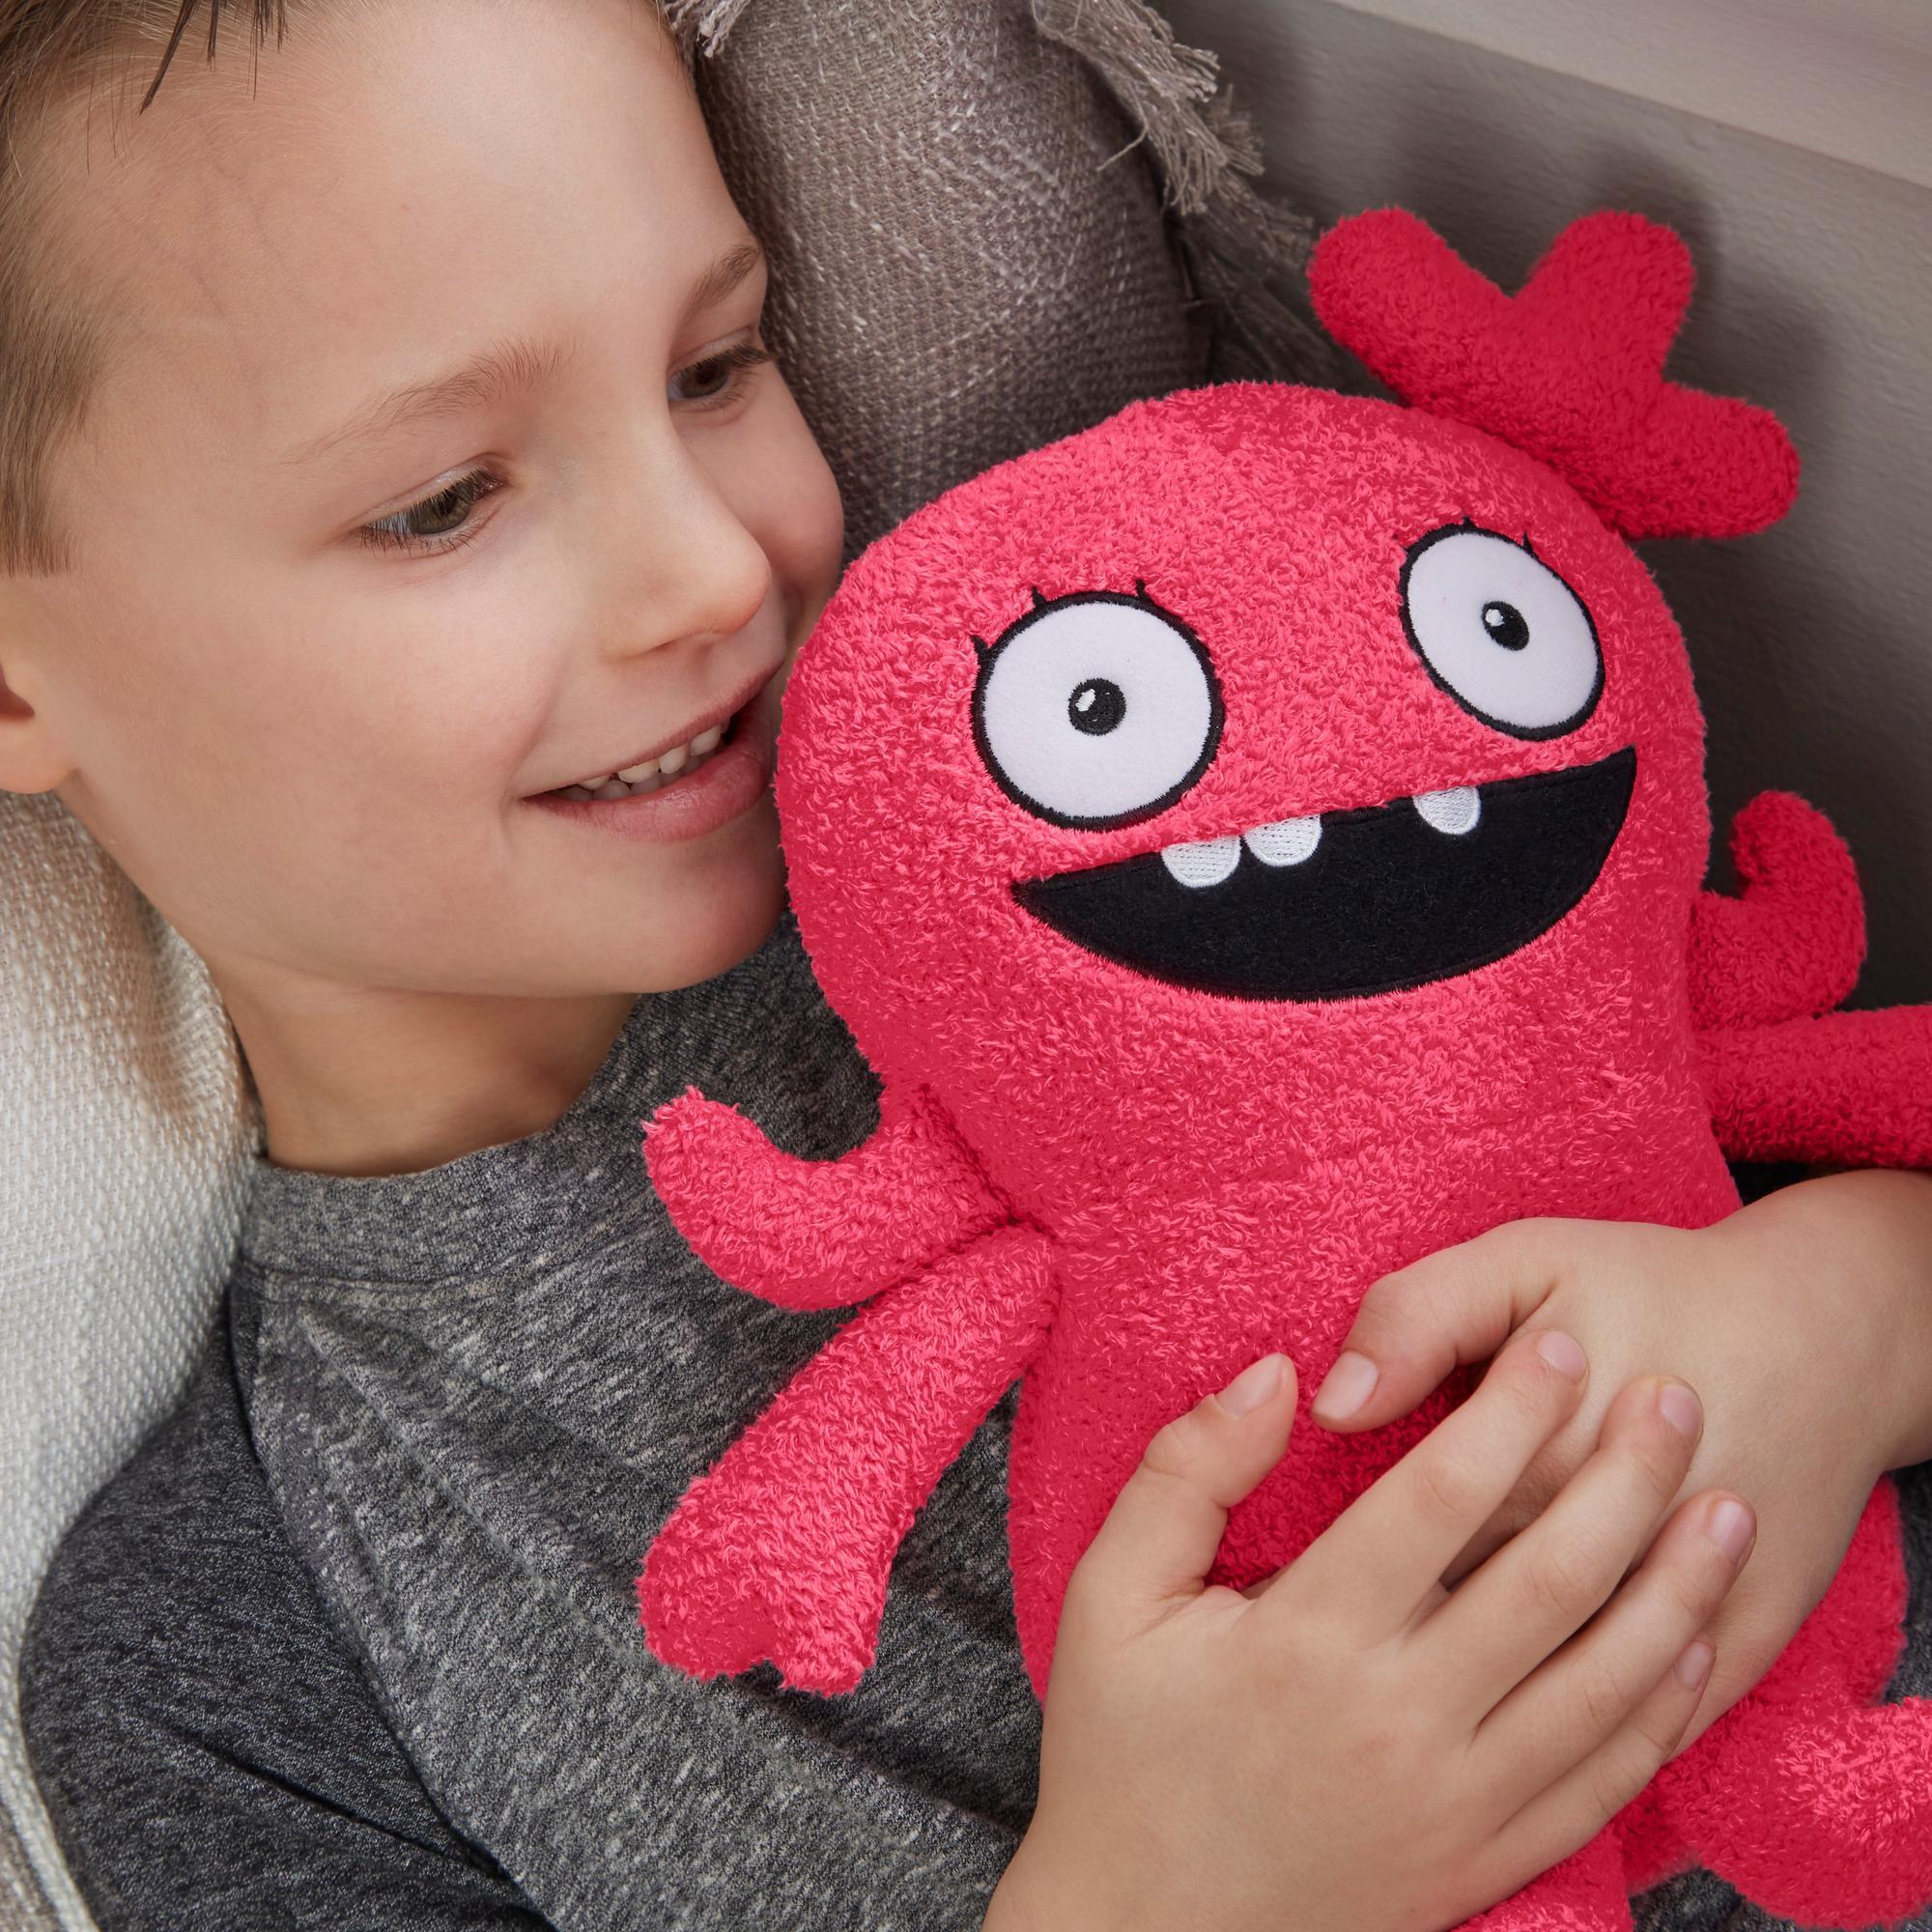 UglyDolls Feature Sounds Moxy, Stuffed Plush Toy that Talks, 11.5 inches tall product thumbnail 1